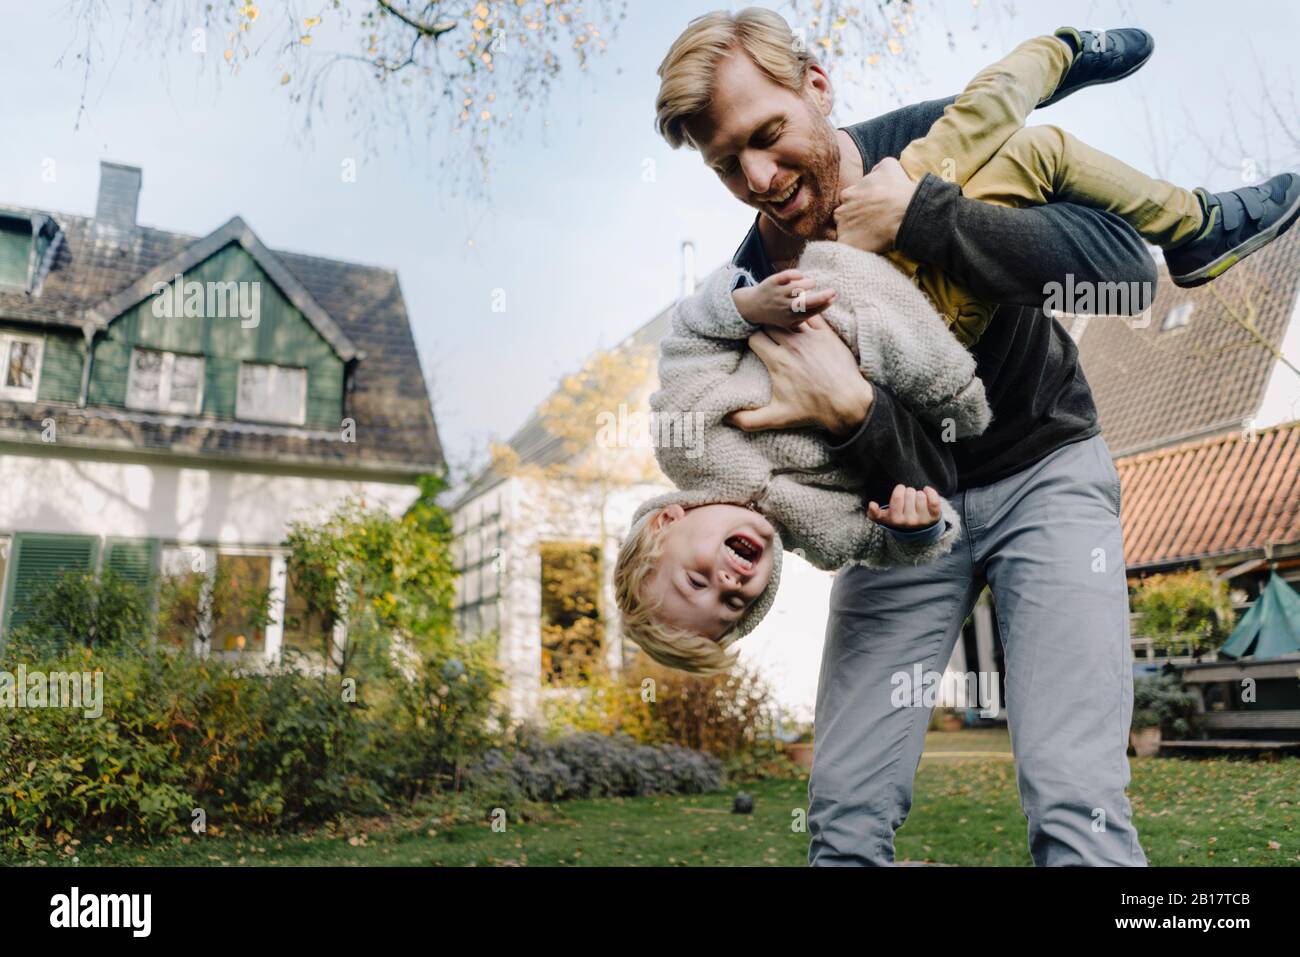 Happy father playing with son in garden Stock Photo